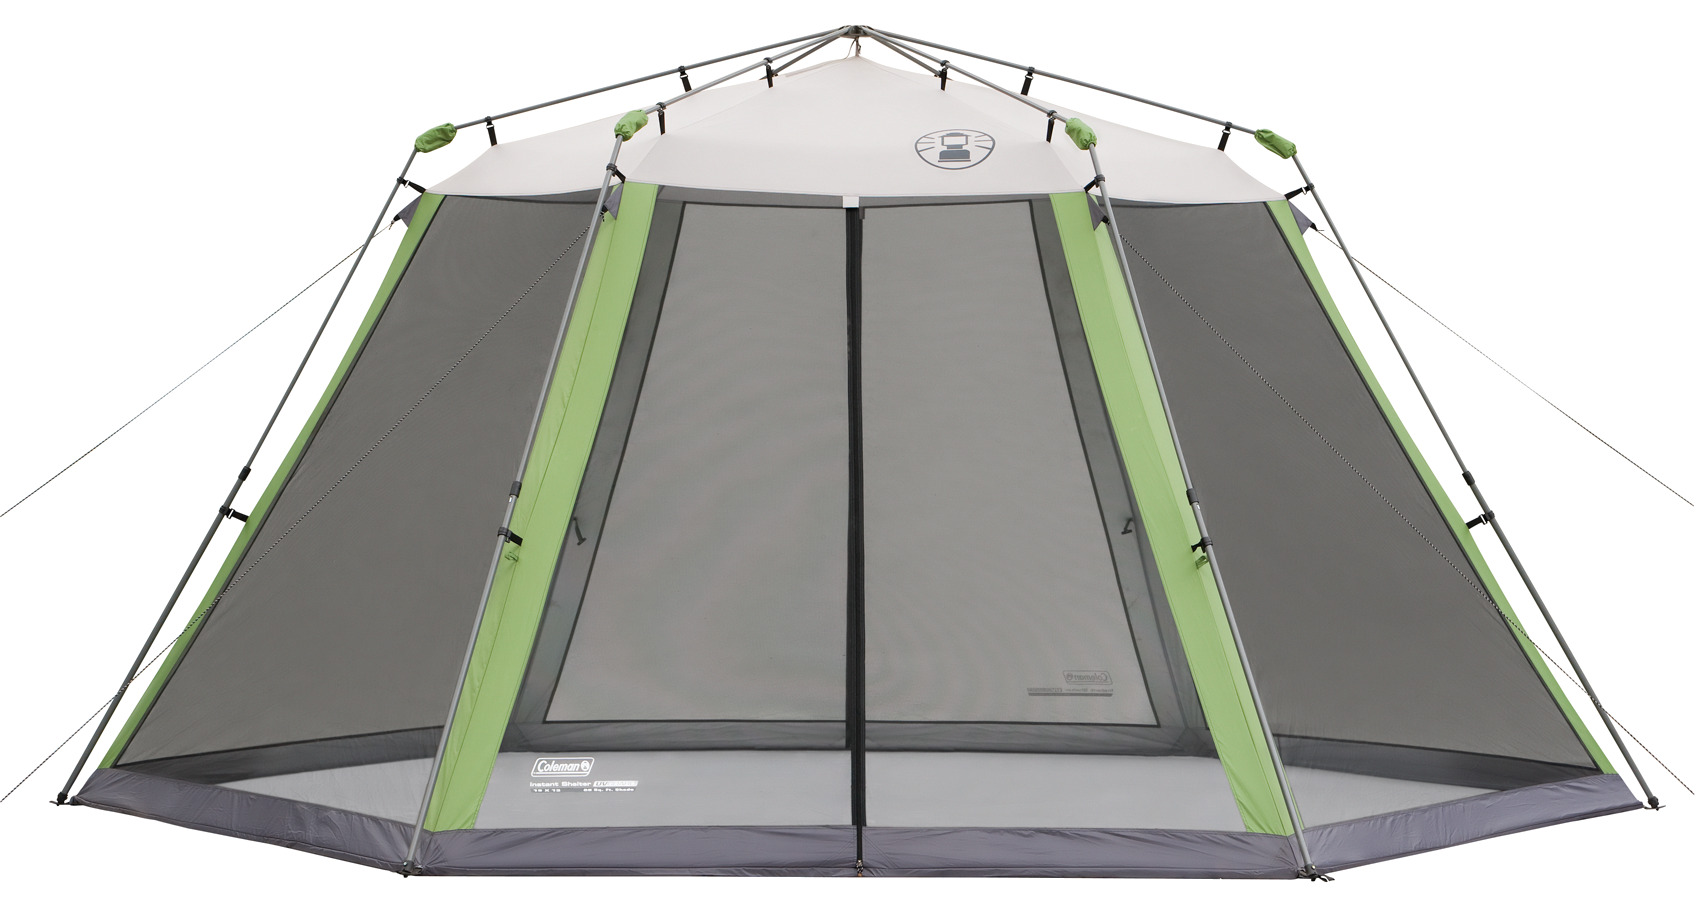 15 x 13 Screened Canopy Sun Shelter with Instant Setup | Coleman